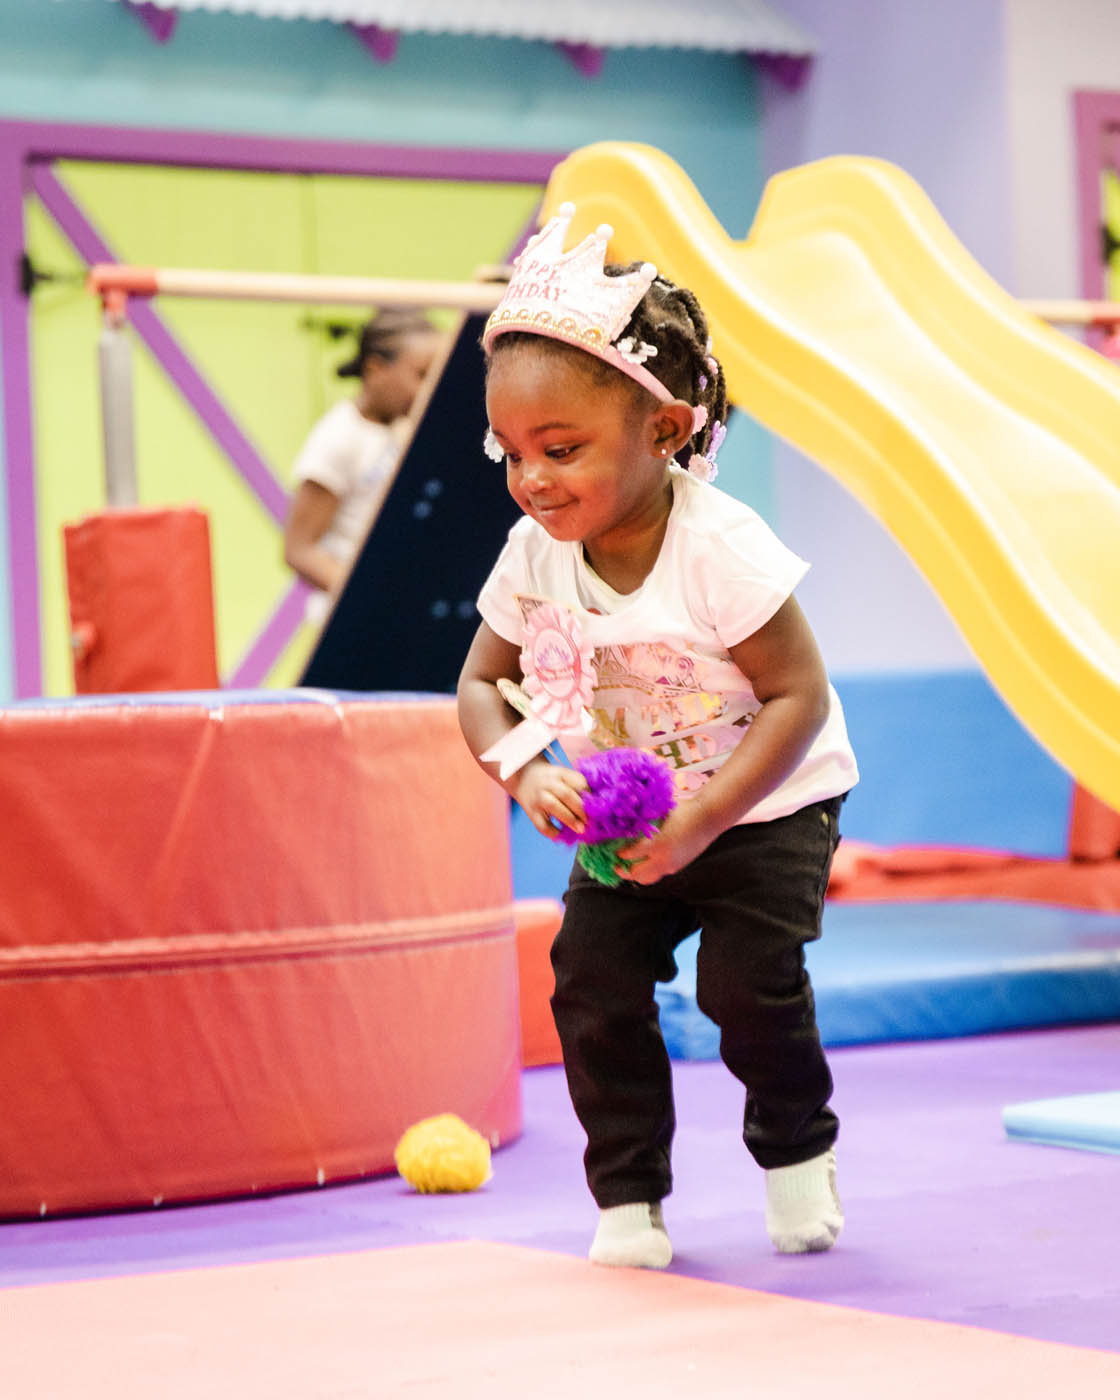 A little girl enjoying her b day party at Romp n' Roll North Raleigh kids birthday party places.